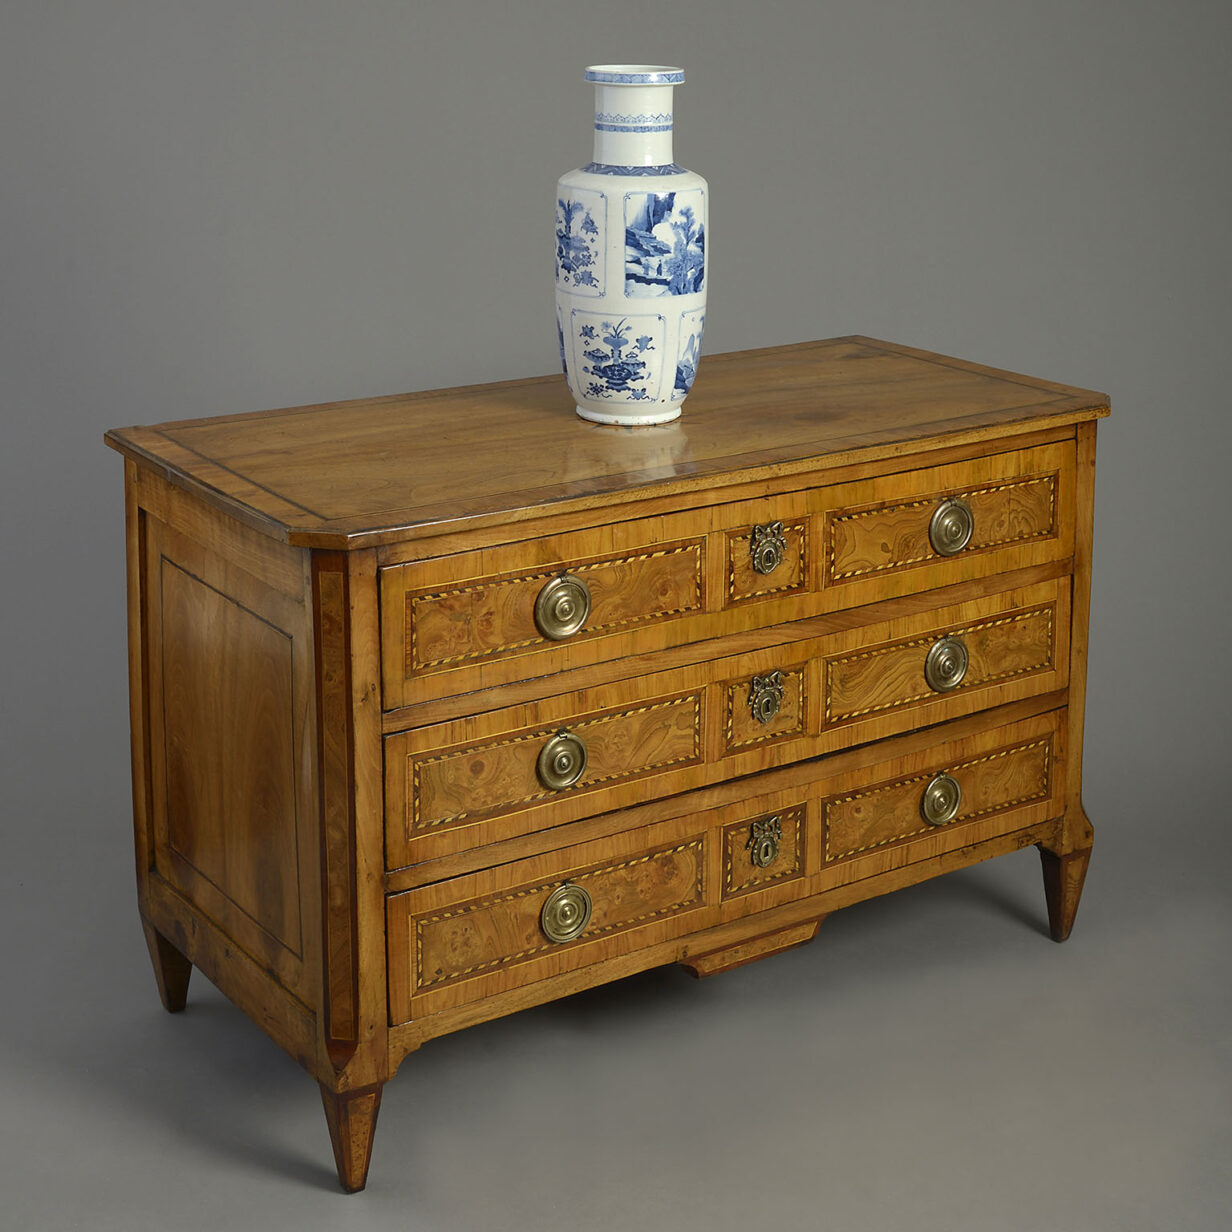 Late 18th Century Louis XVI Period Burr Elm and Walnut Commode